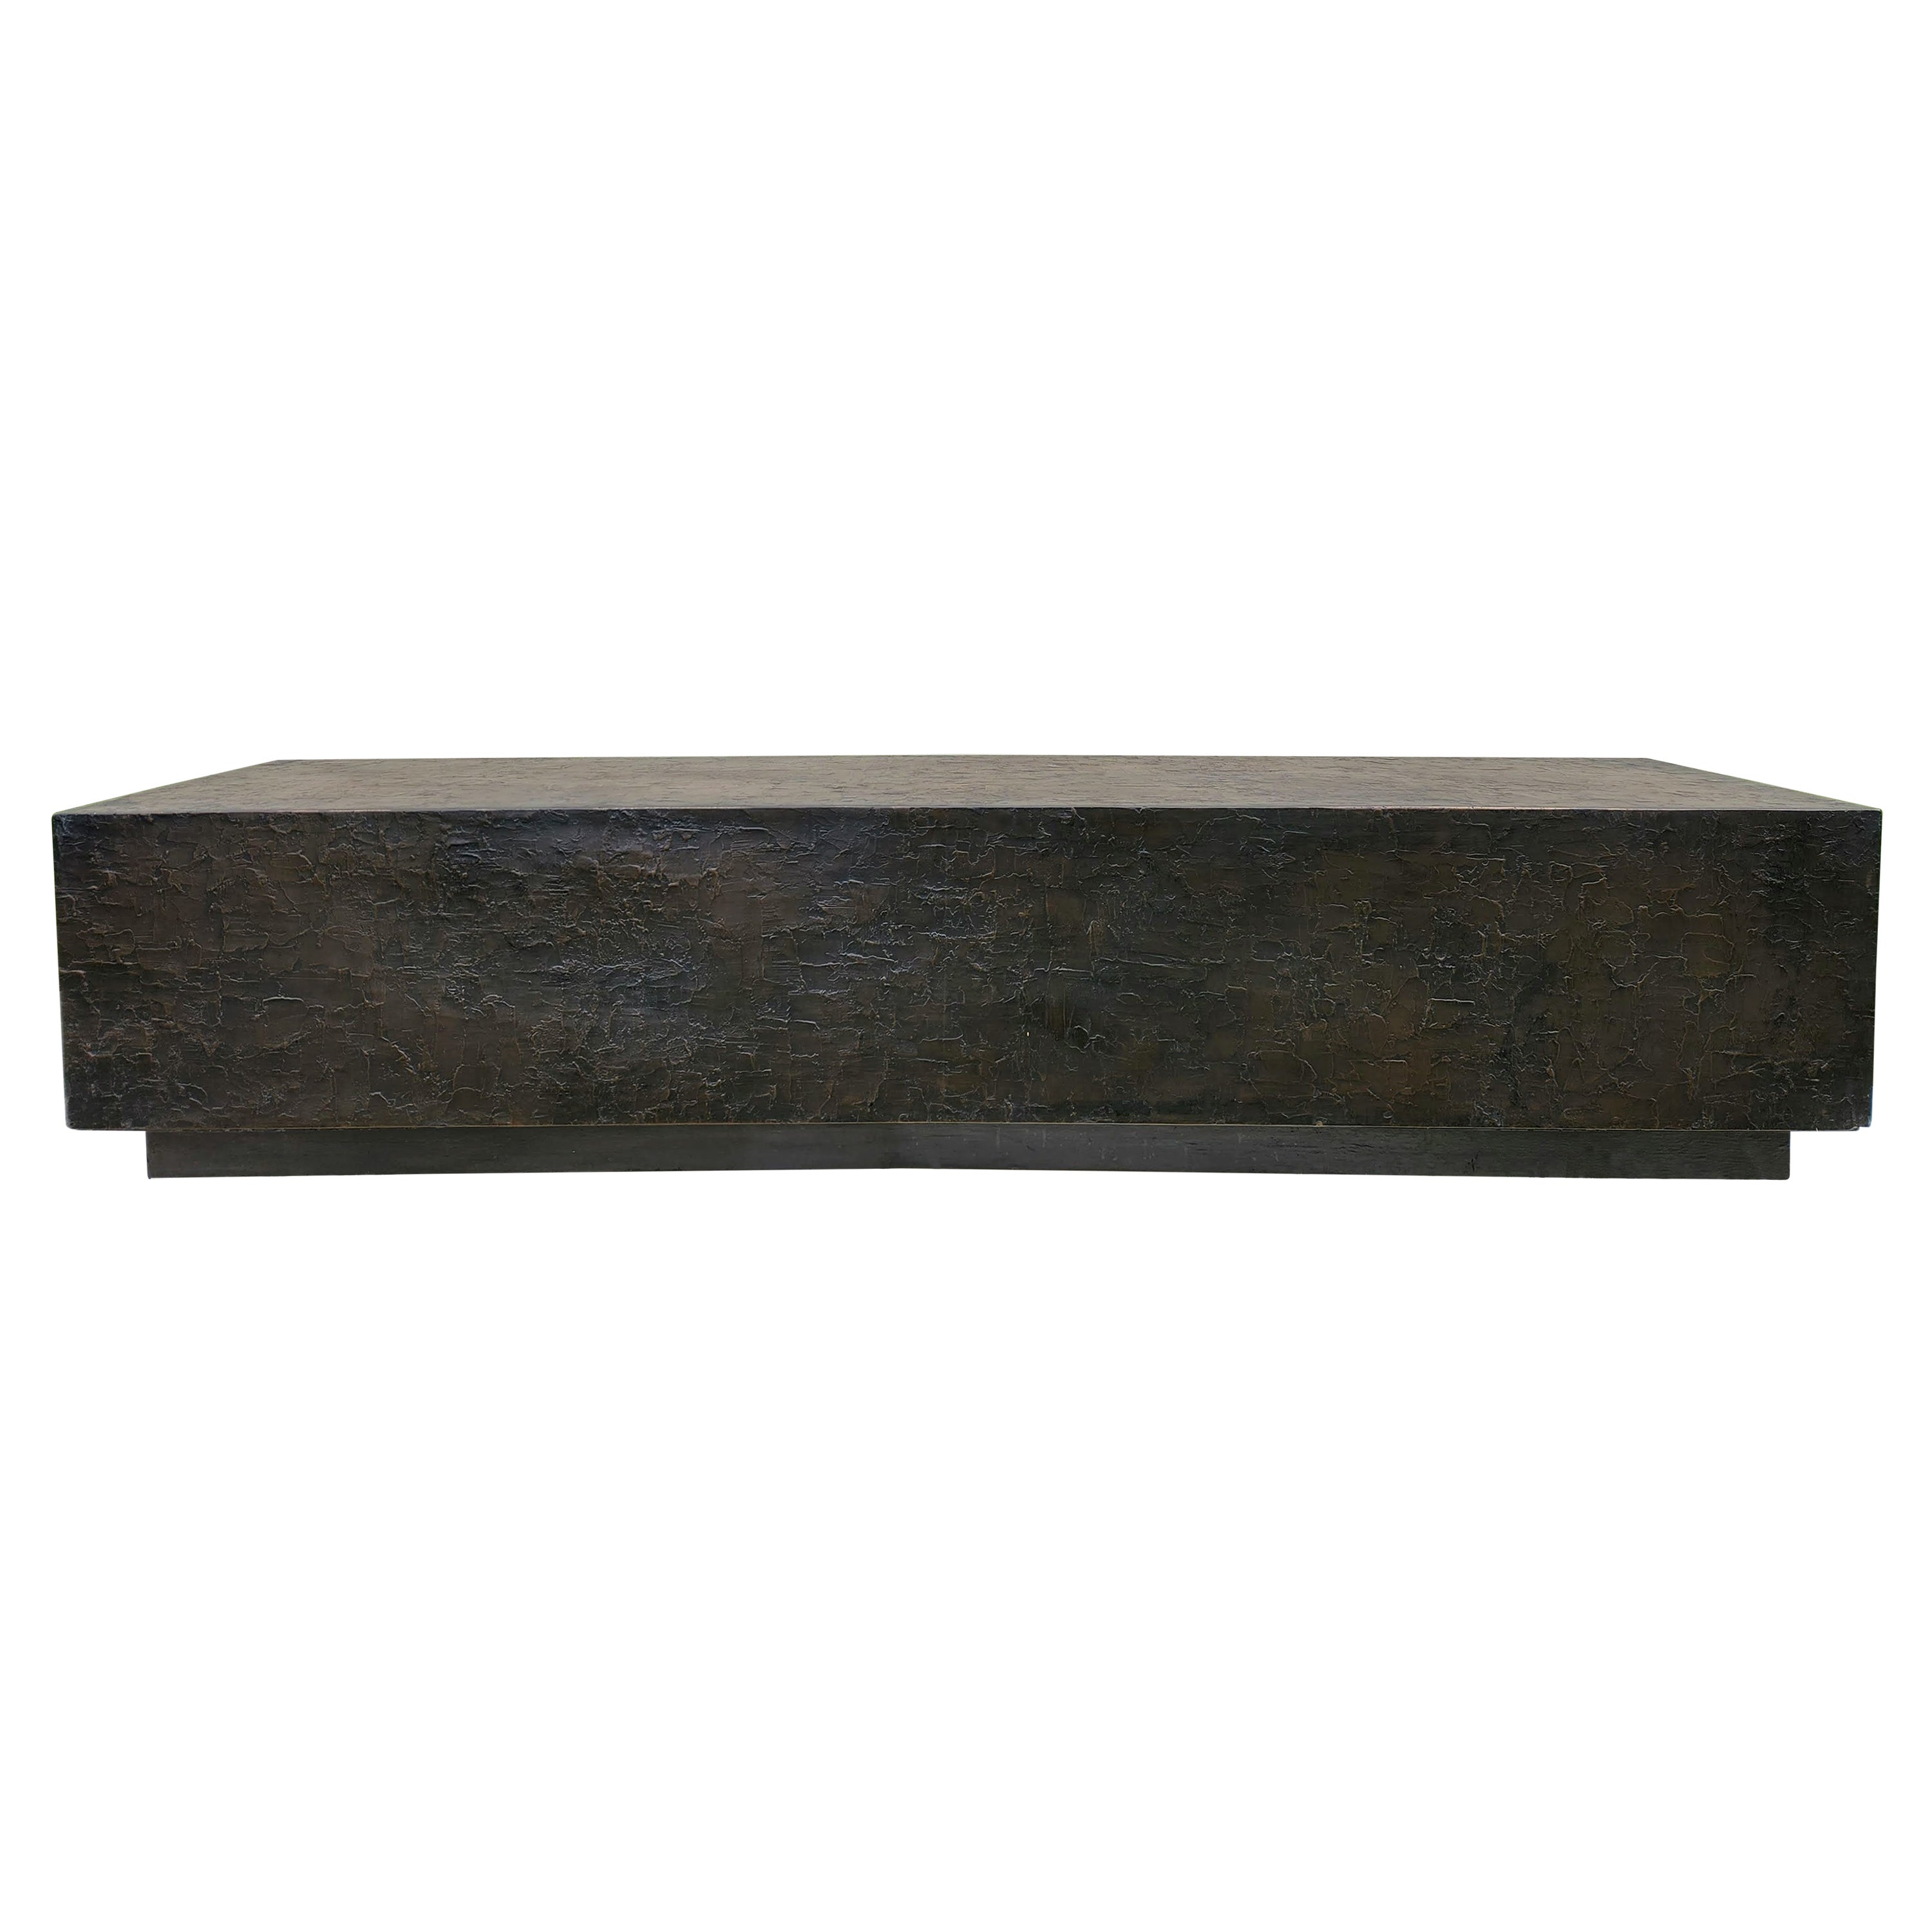 Forms and Surfaces Cast Bronze Sheathed Bench, California, 1960s-1970s